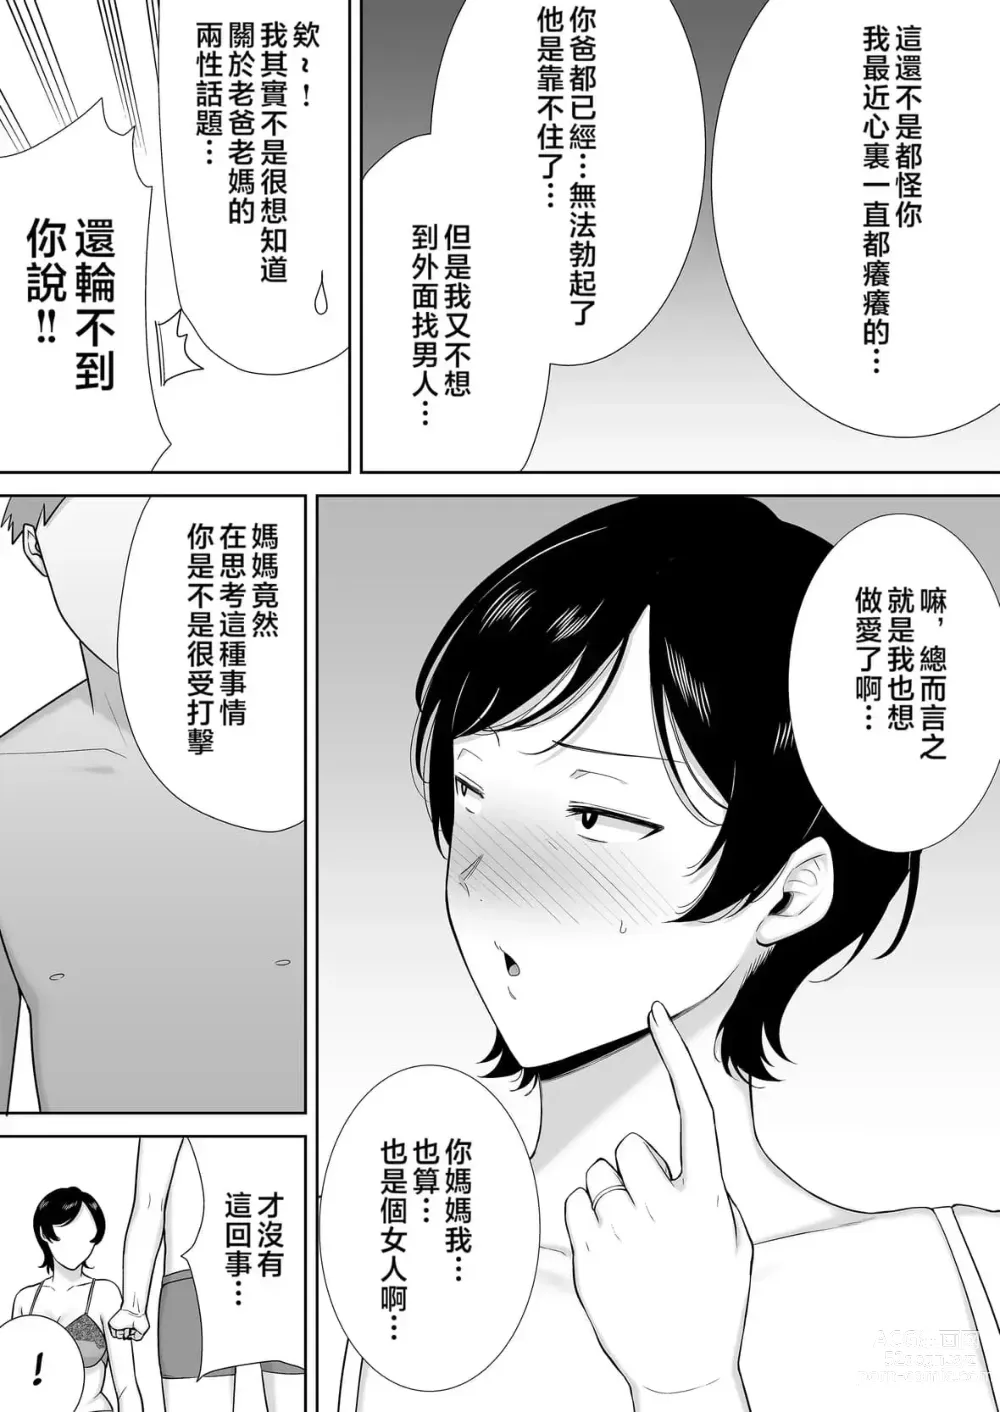 Page 19 of doujinshi even mom want a litle lovin